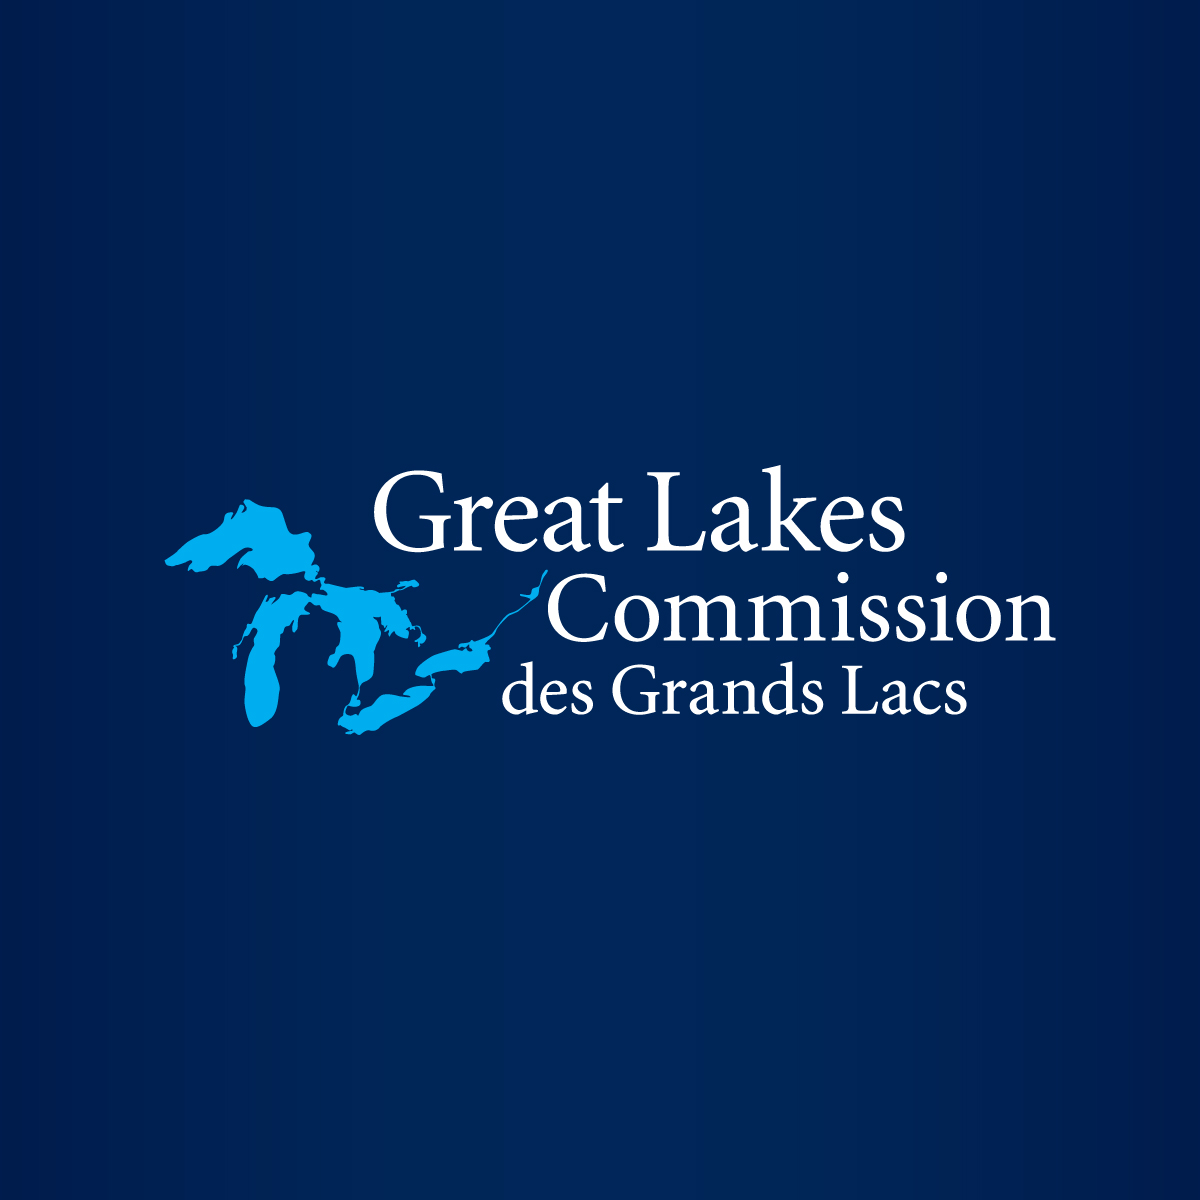 Tribal and state Great Lakes fishing deal sent to federal judge for review